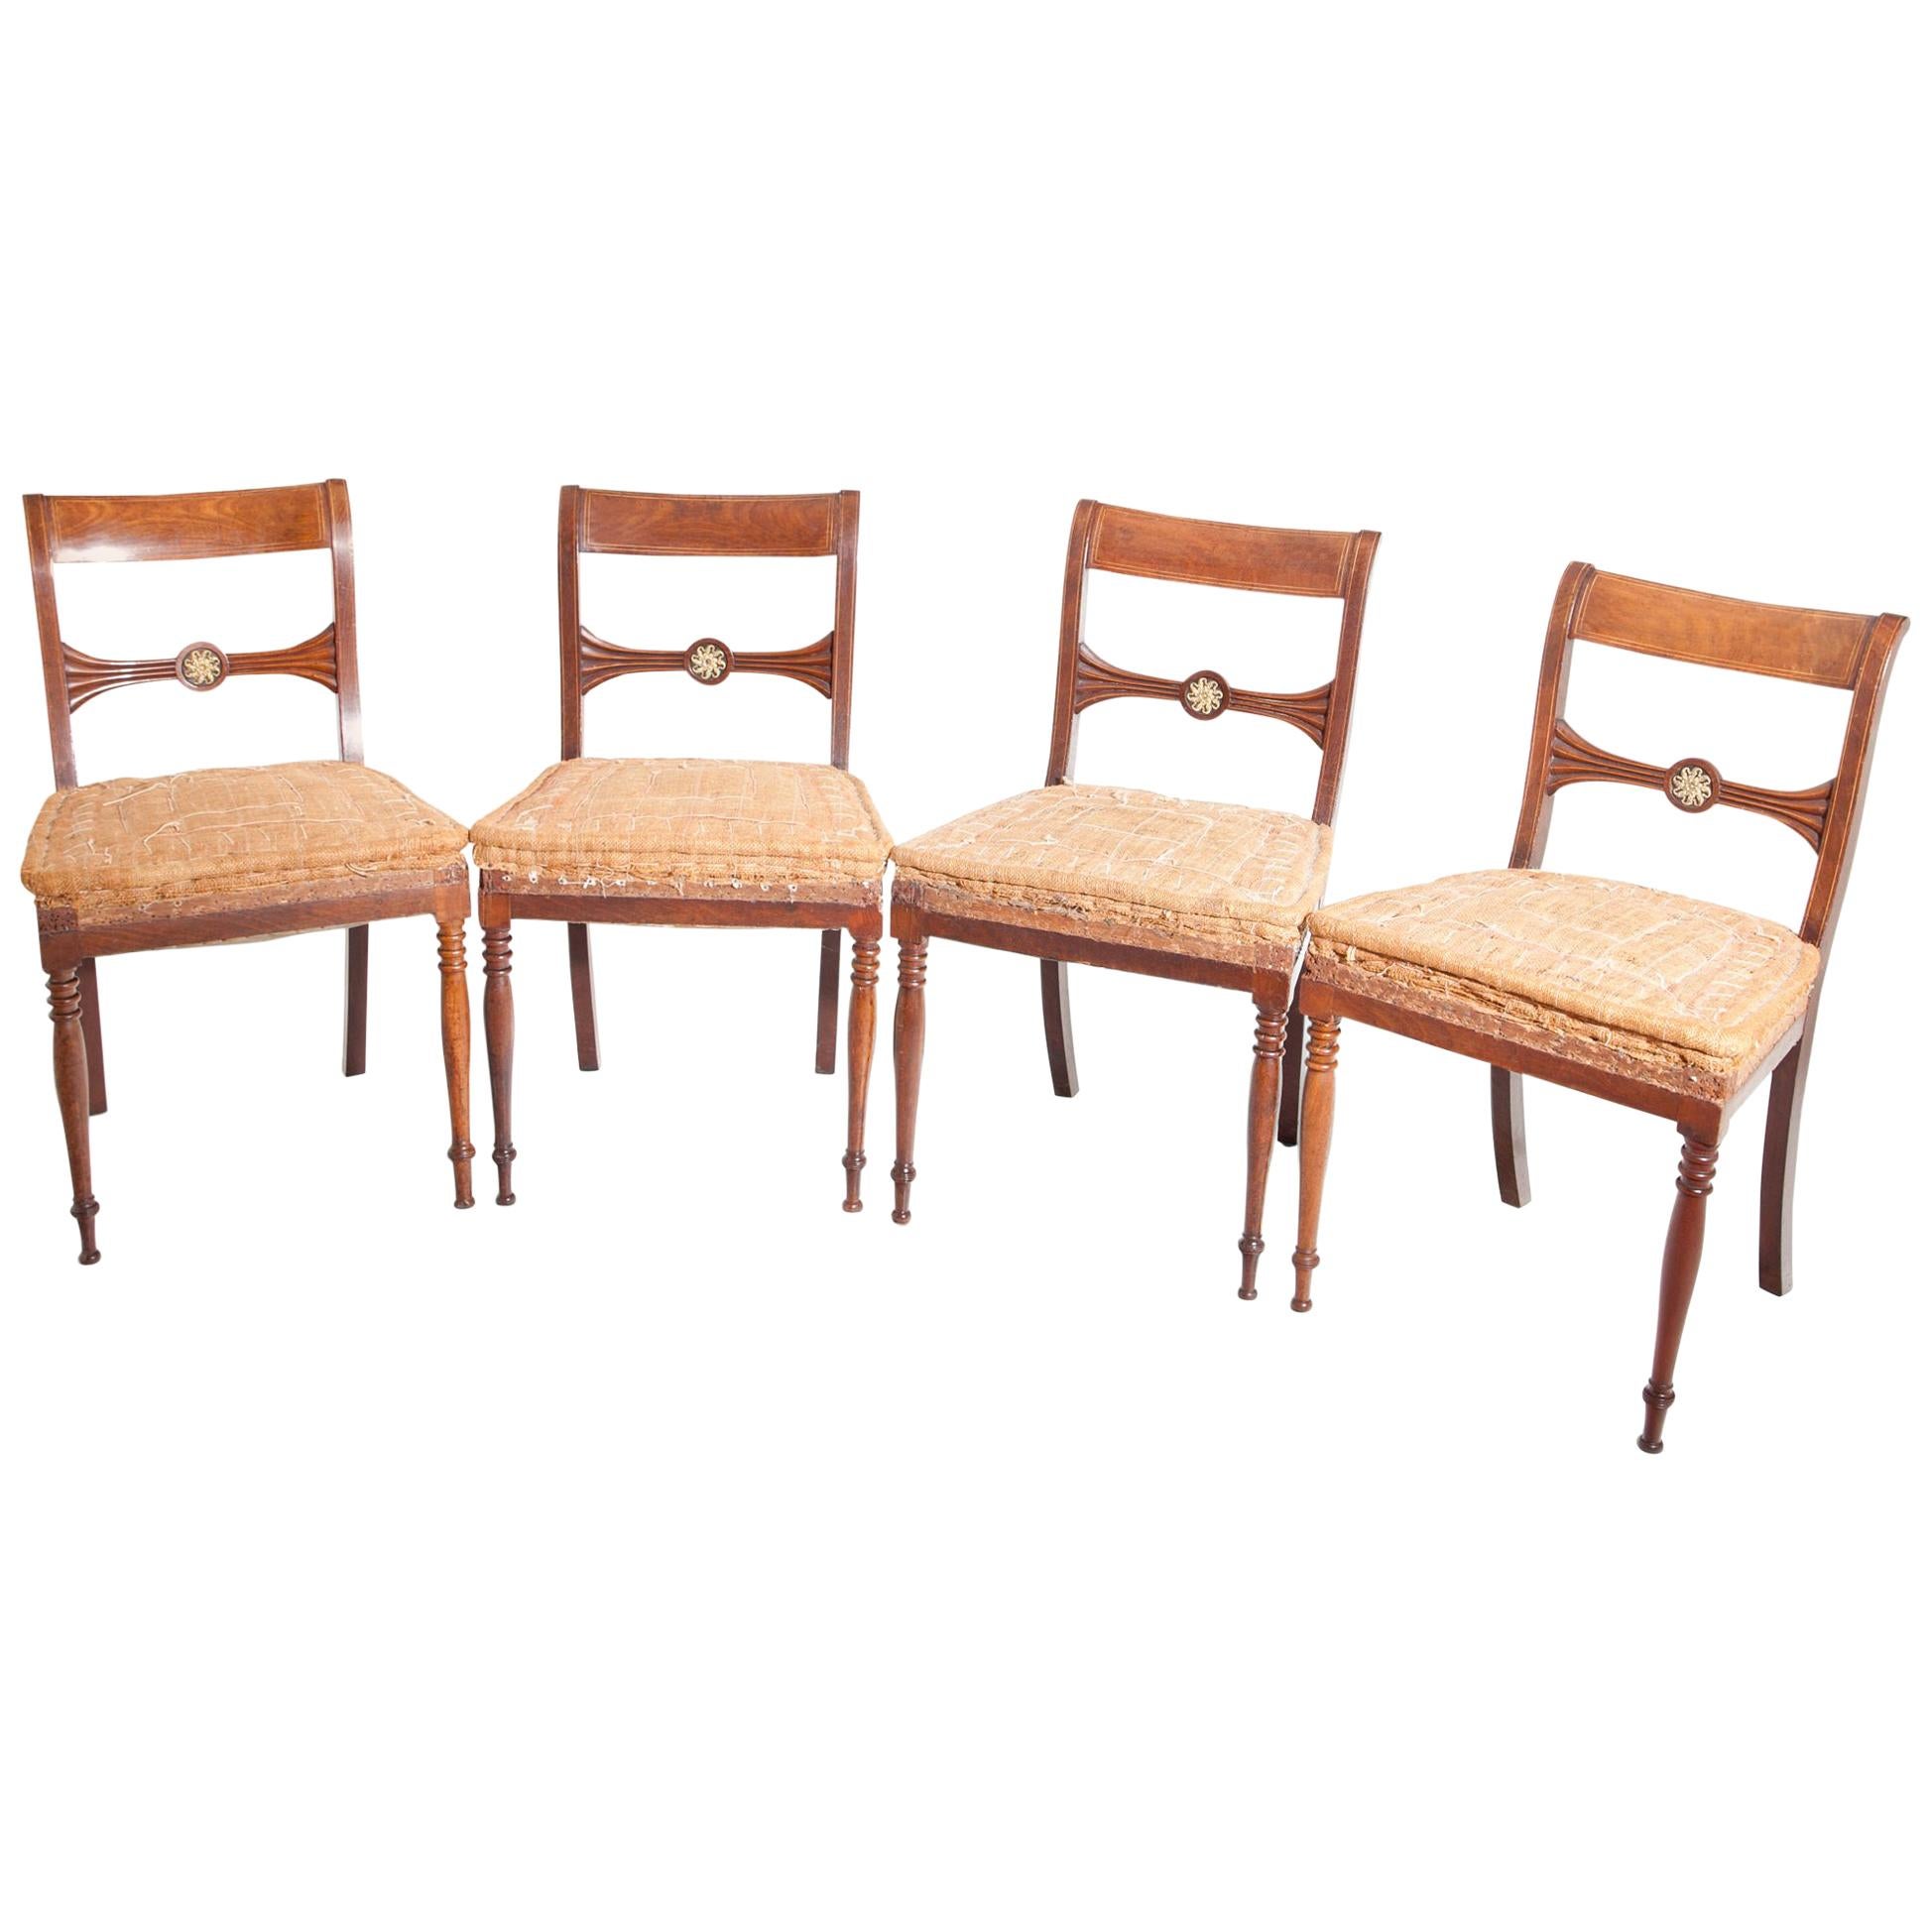 Early 19th Century Chairs, Probably Berlin, circa 1825-1830